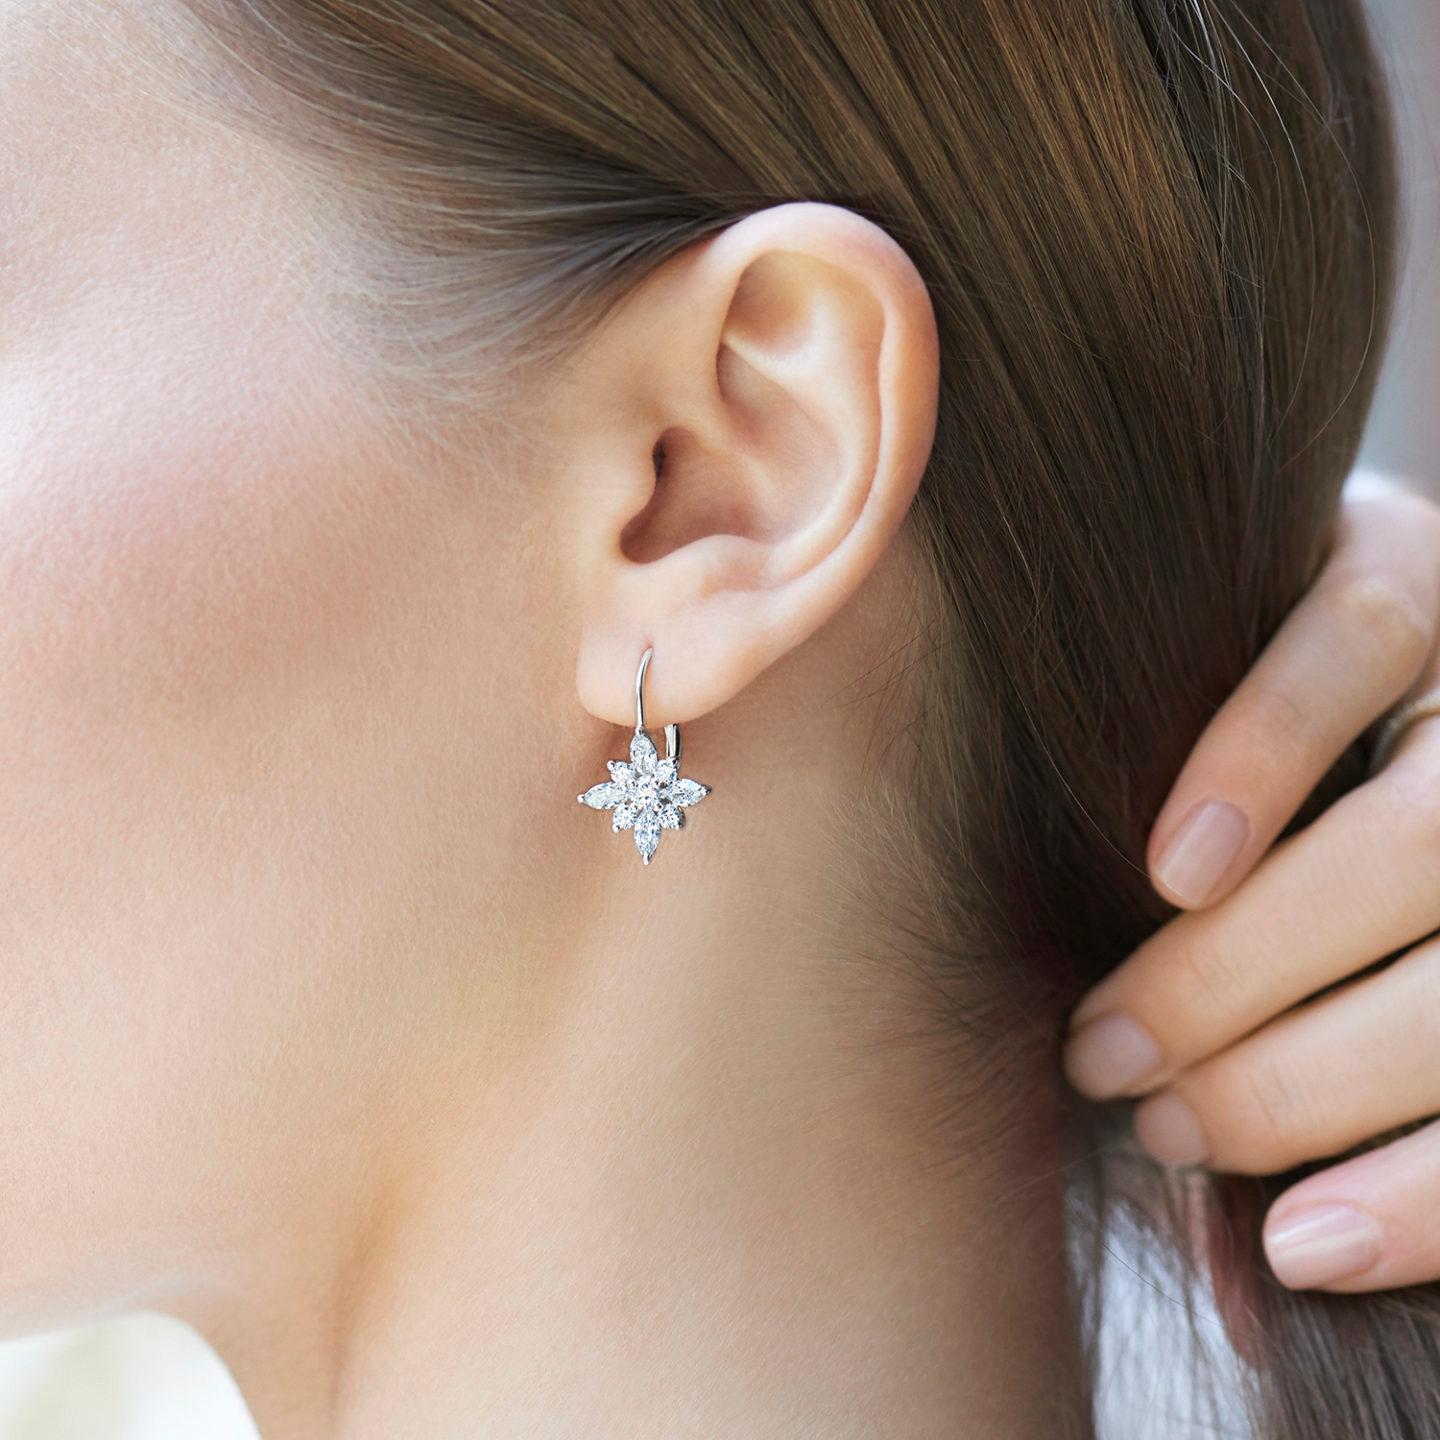 These beautiful earrings from the Kwiat Star Collection feature 1.85 carat total weight in round and marquise diamonds set in platinum. The round diamonds ae surrounded by marquis diamonds to form a beautiful star shape. Each star dangles from 18